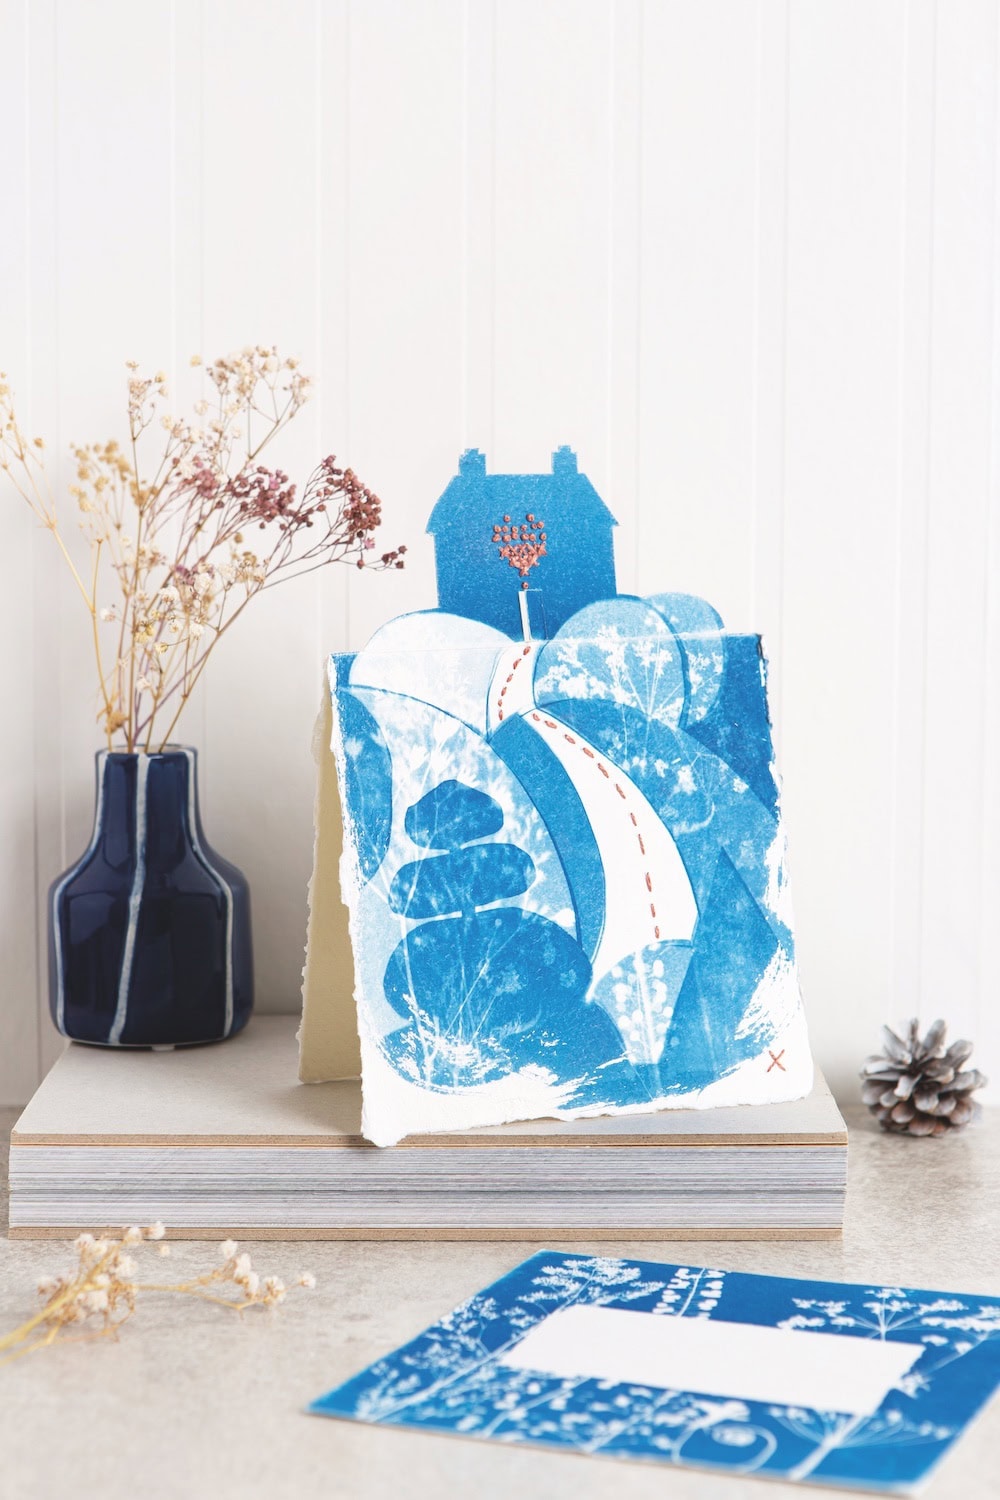 cyanotype topiary greetings card with embroidery detail by kim tillyer from her new book Beginner's Guide to Cyanotype. We have four signed copies to give away as well as a free diy tutorial by kim for you to try your hand at this highly enjoyable and creative craft